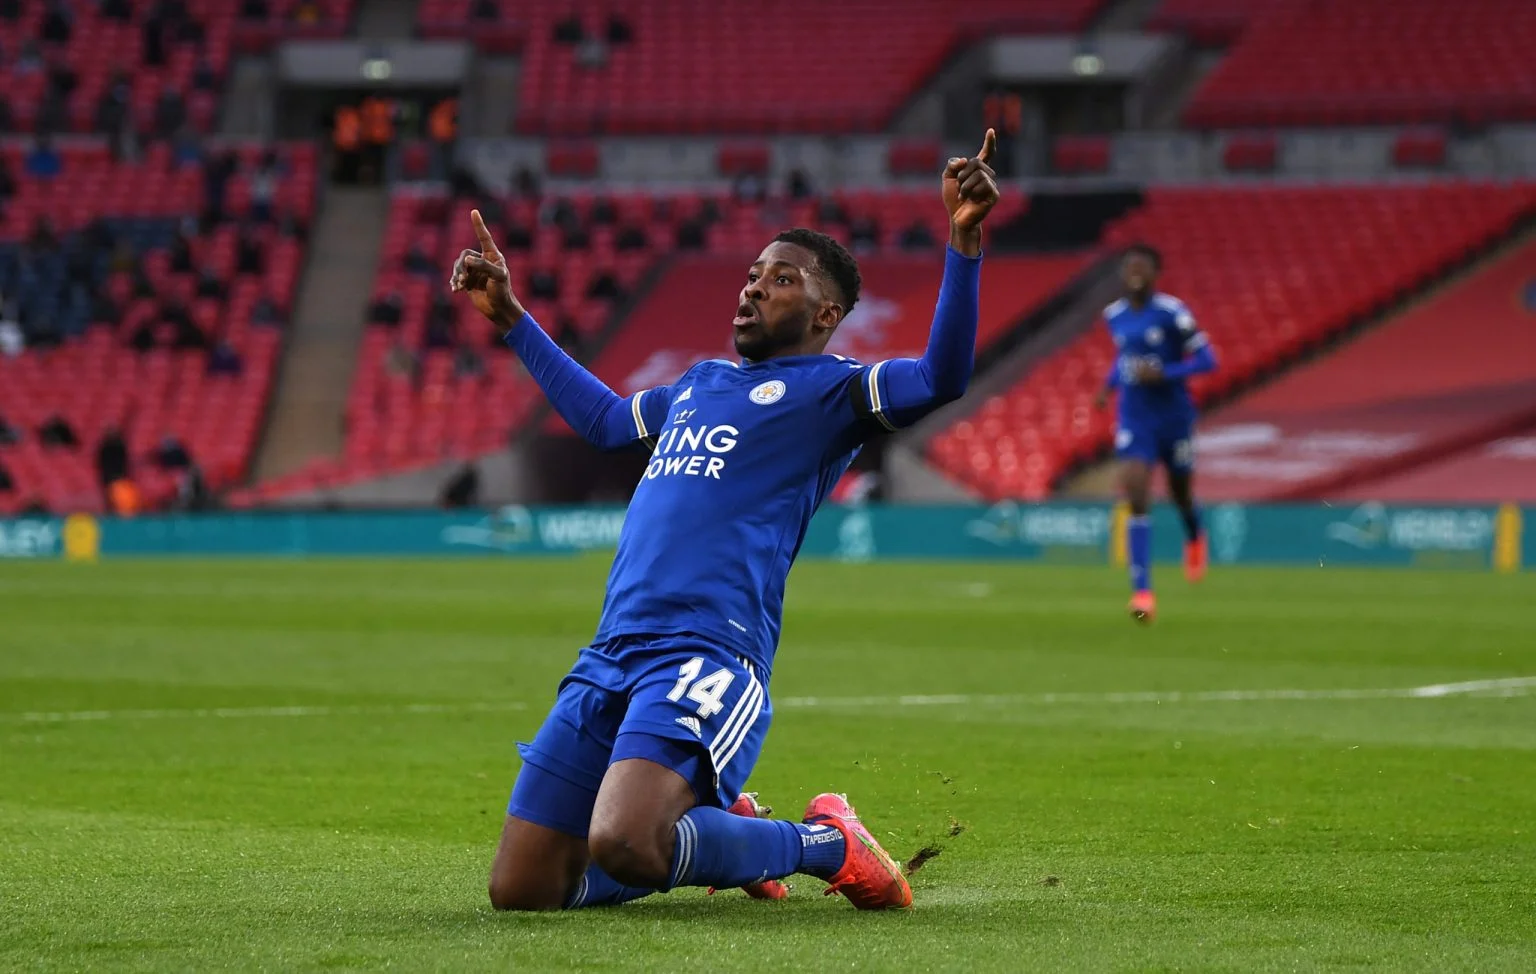 Iheanacho set for 220th appearance as Leicester tackle Swansea City